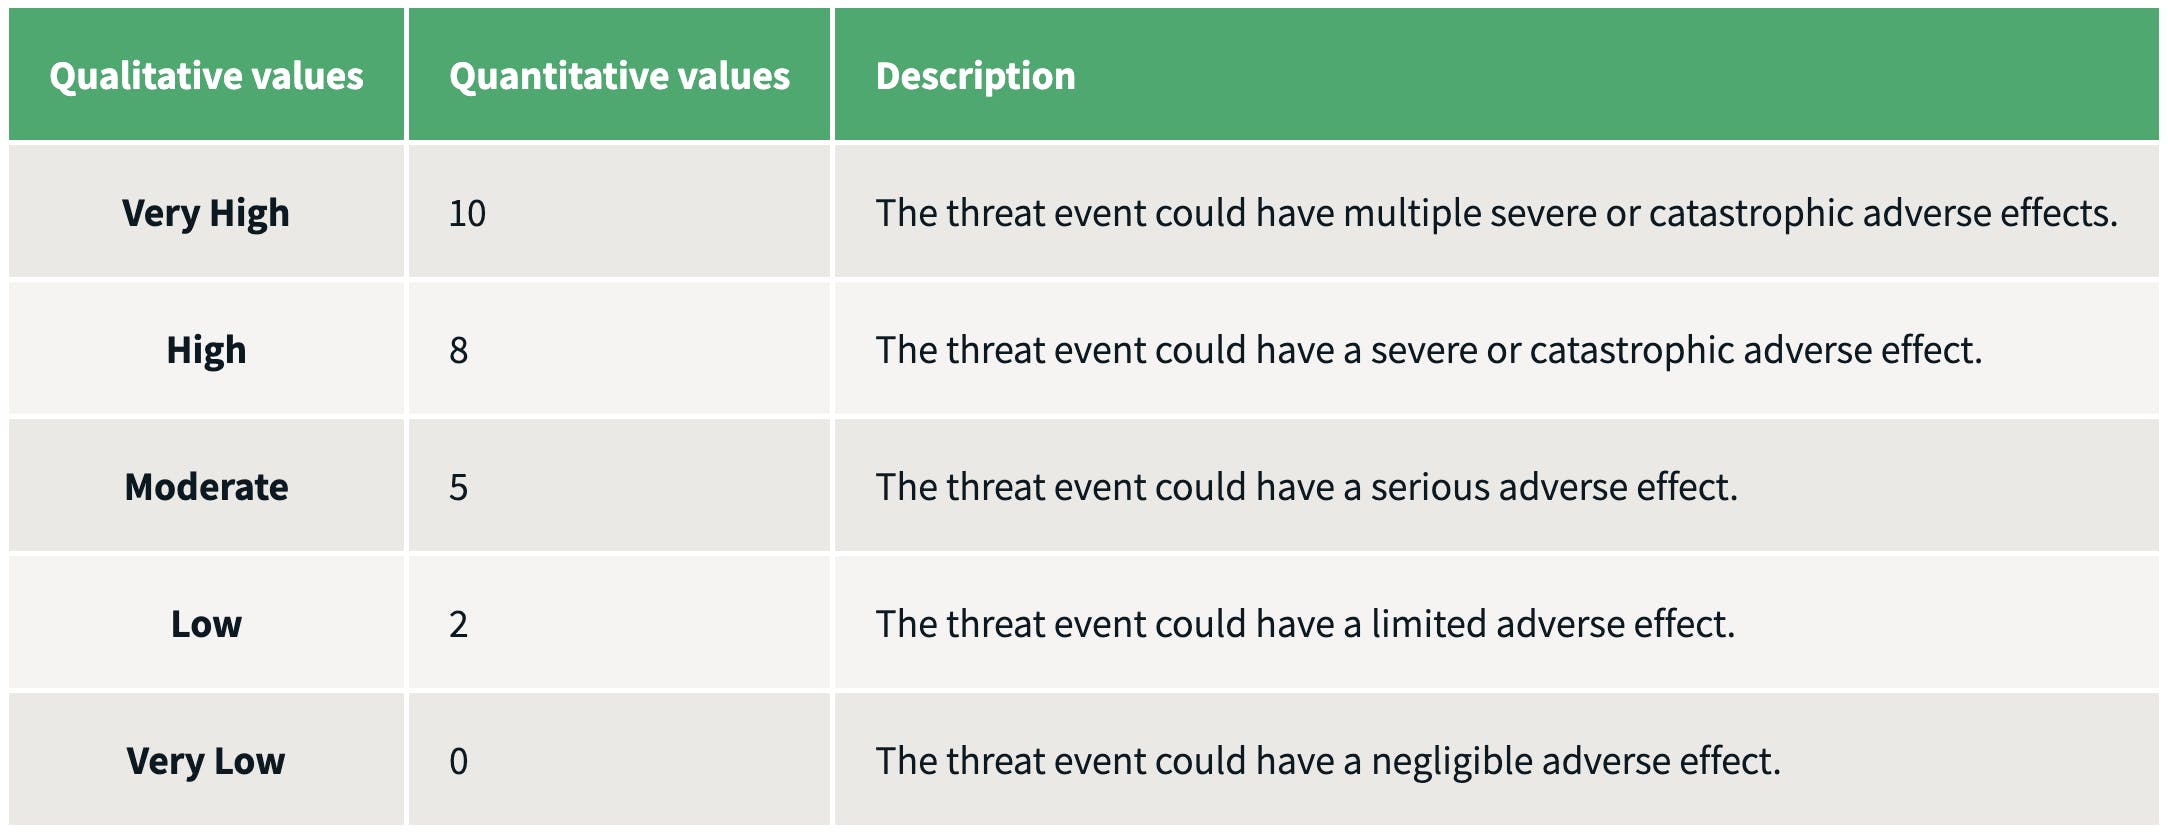 Risk assessment of impact of threat events